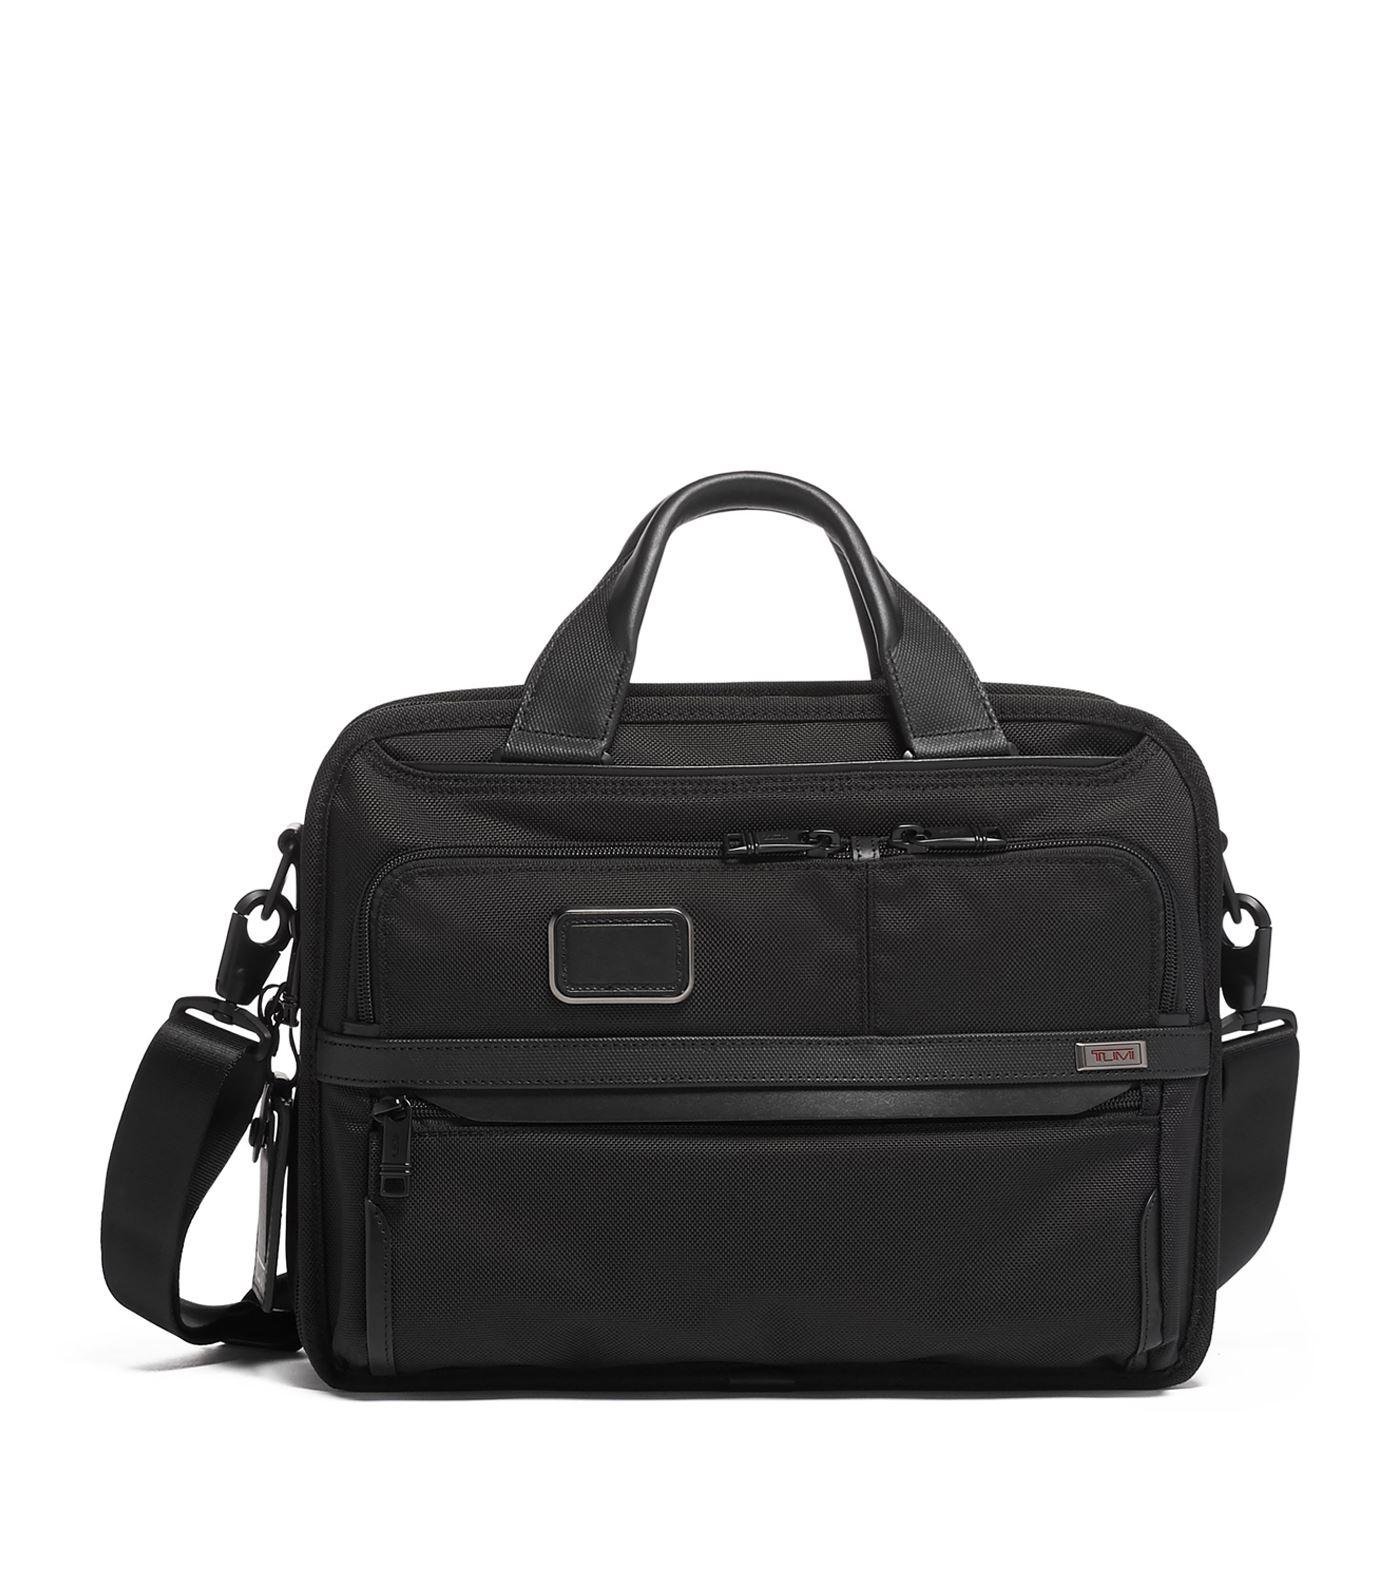 Lyst - Tumi Alpha 3 Expandable Laptop Briefcase in Black for Men